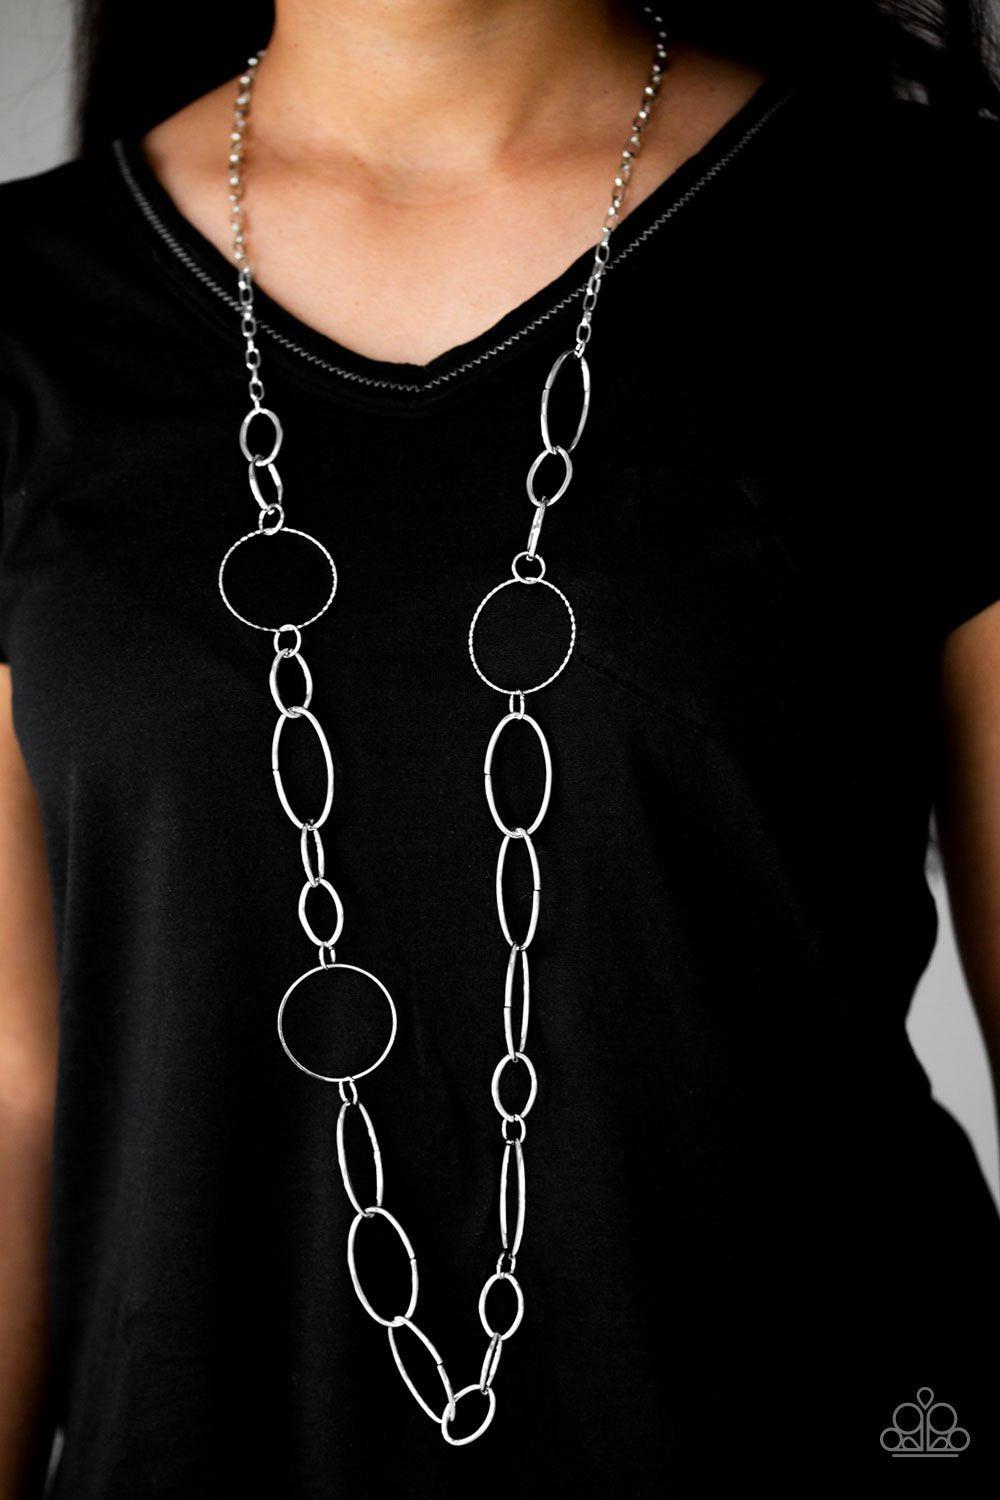 Perfect MISMATCH Silver Necklace - Paparazzi Accessories- model - CarasShop.com - $5 Jewelry by Cara Jewels